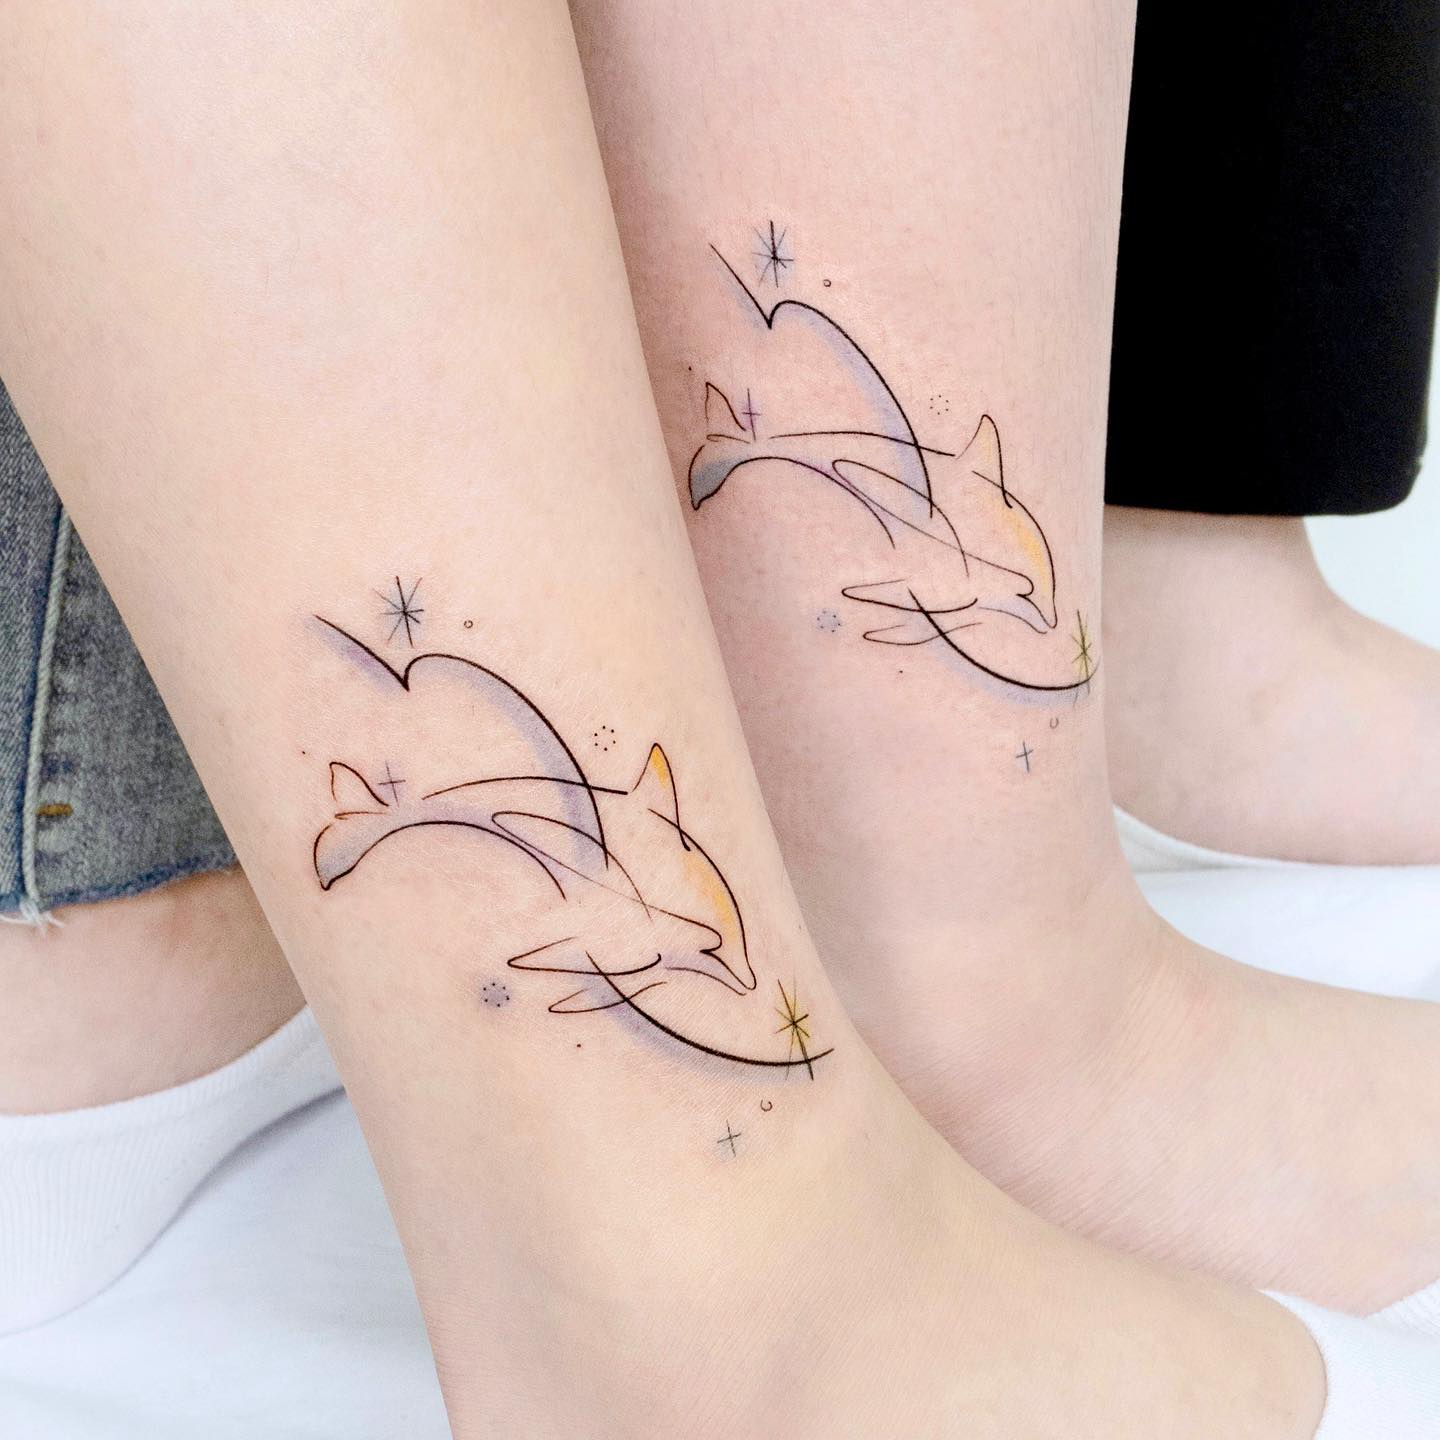 Dolphin tattoo on ankle by heim tattoo